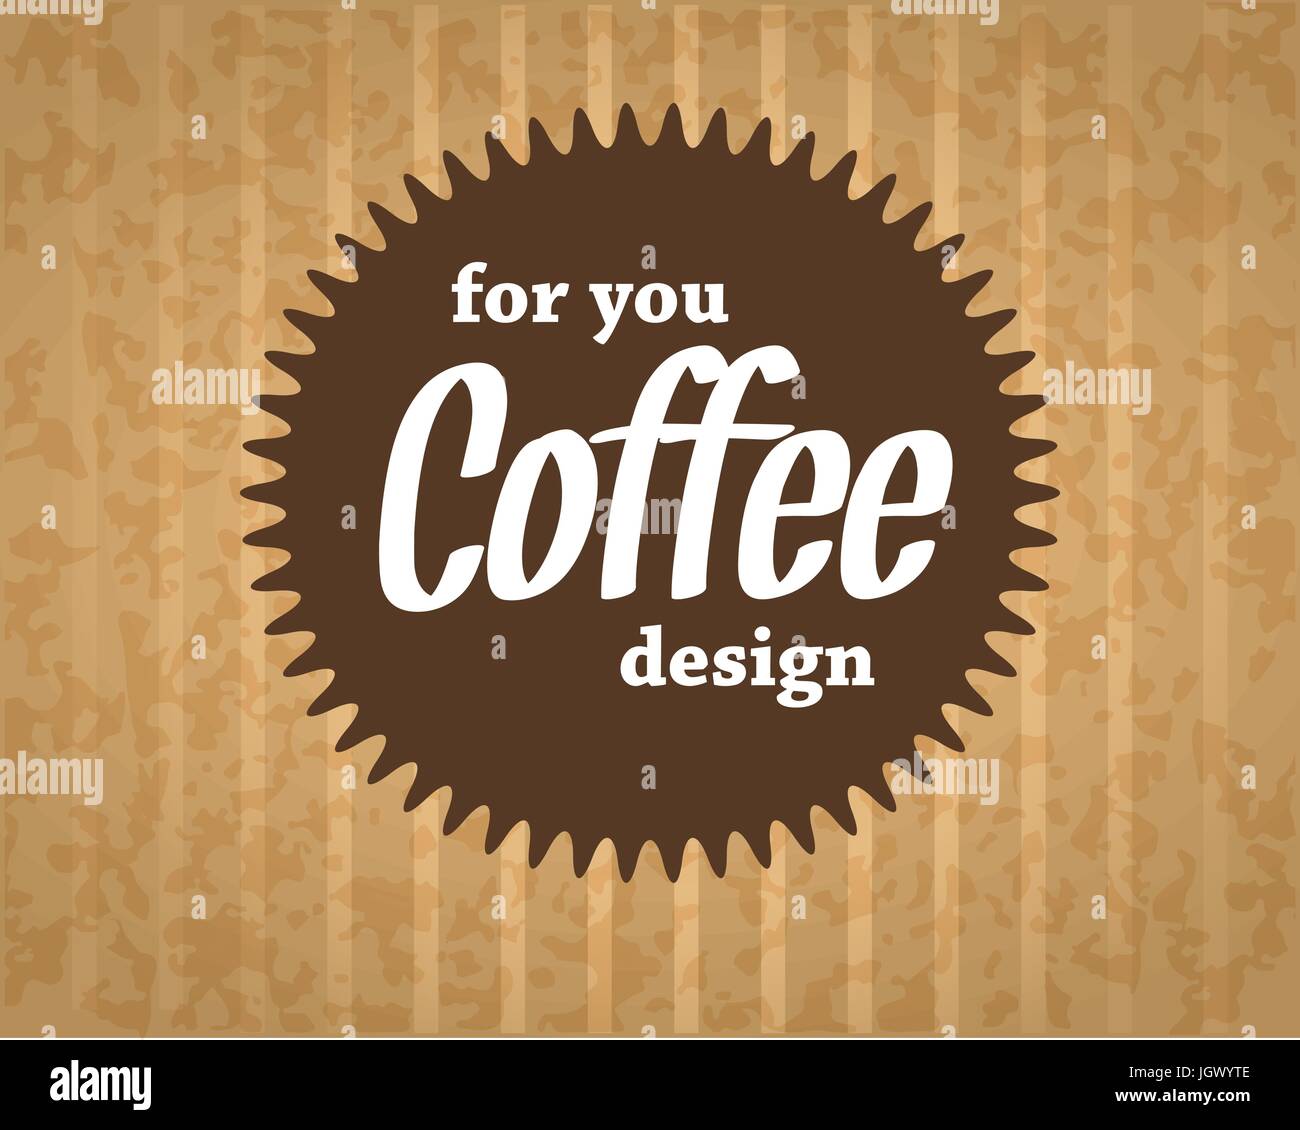 coffee logo on the cardboard background in vintage style Stock Vector